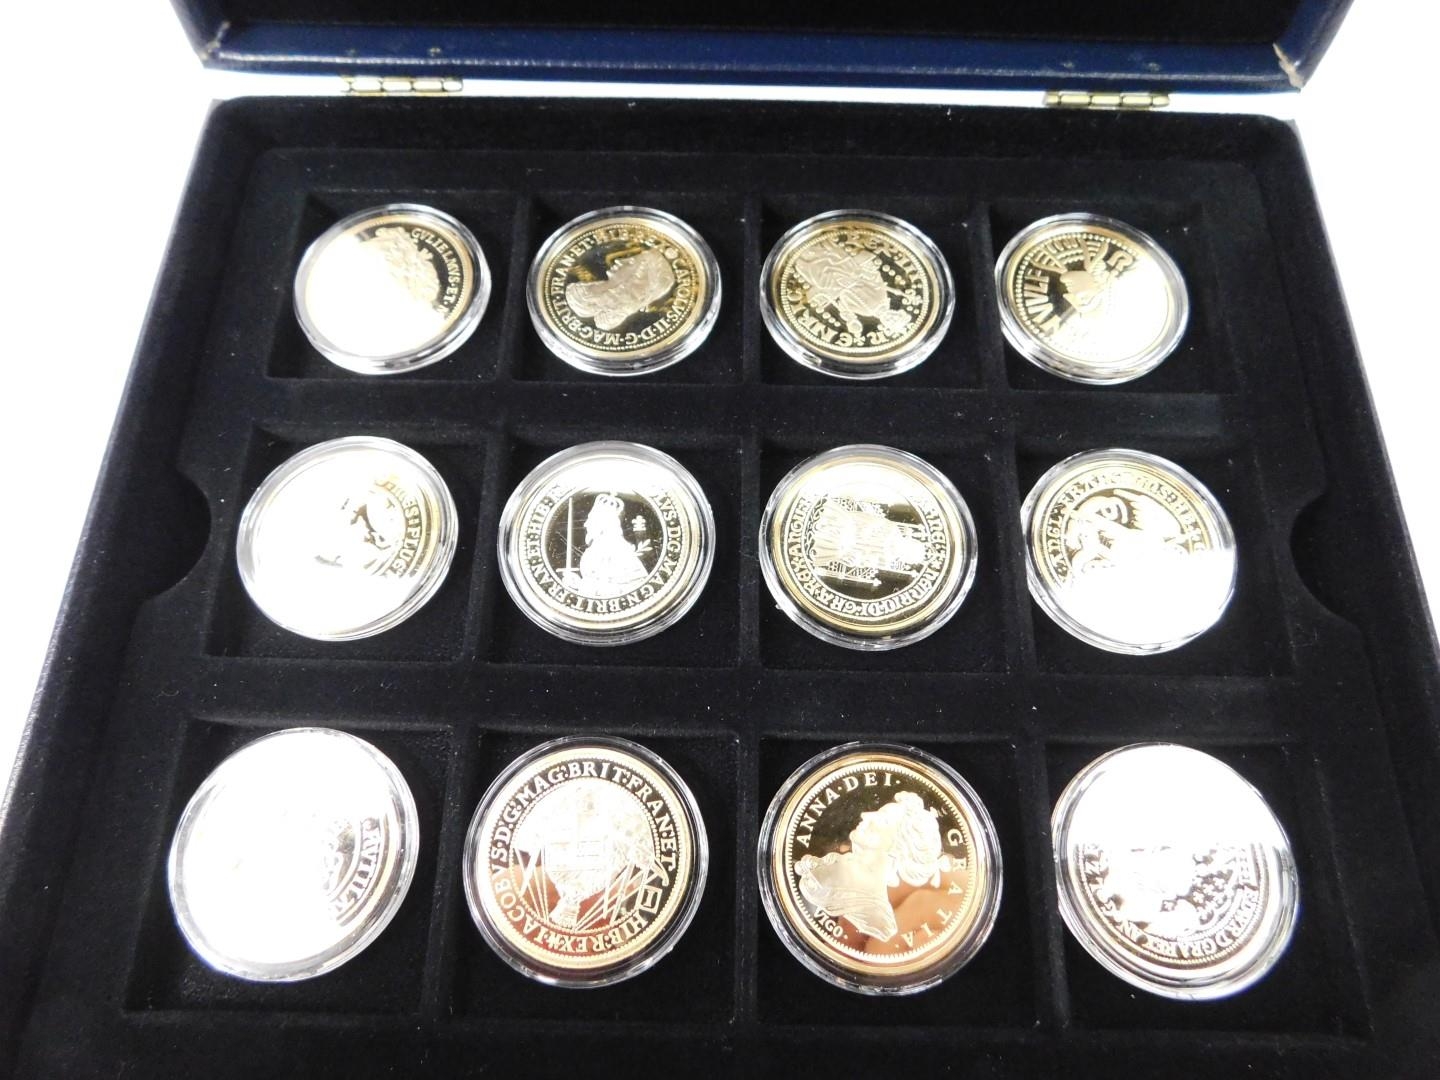 The Westminster Mint Historic Coins of Great Britain Museum Collection